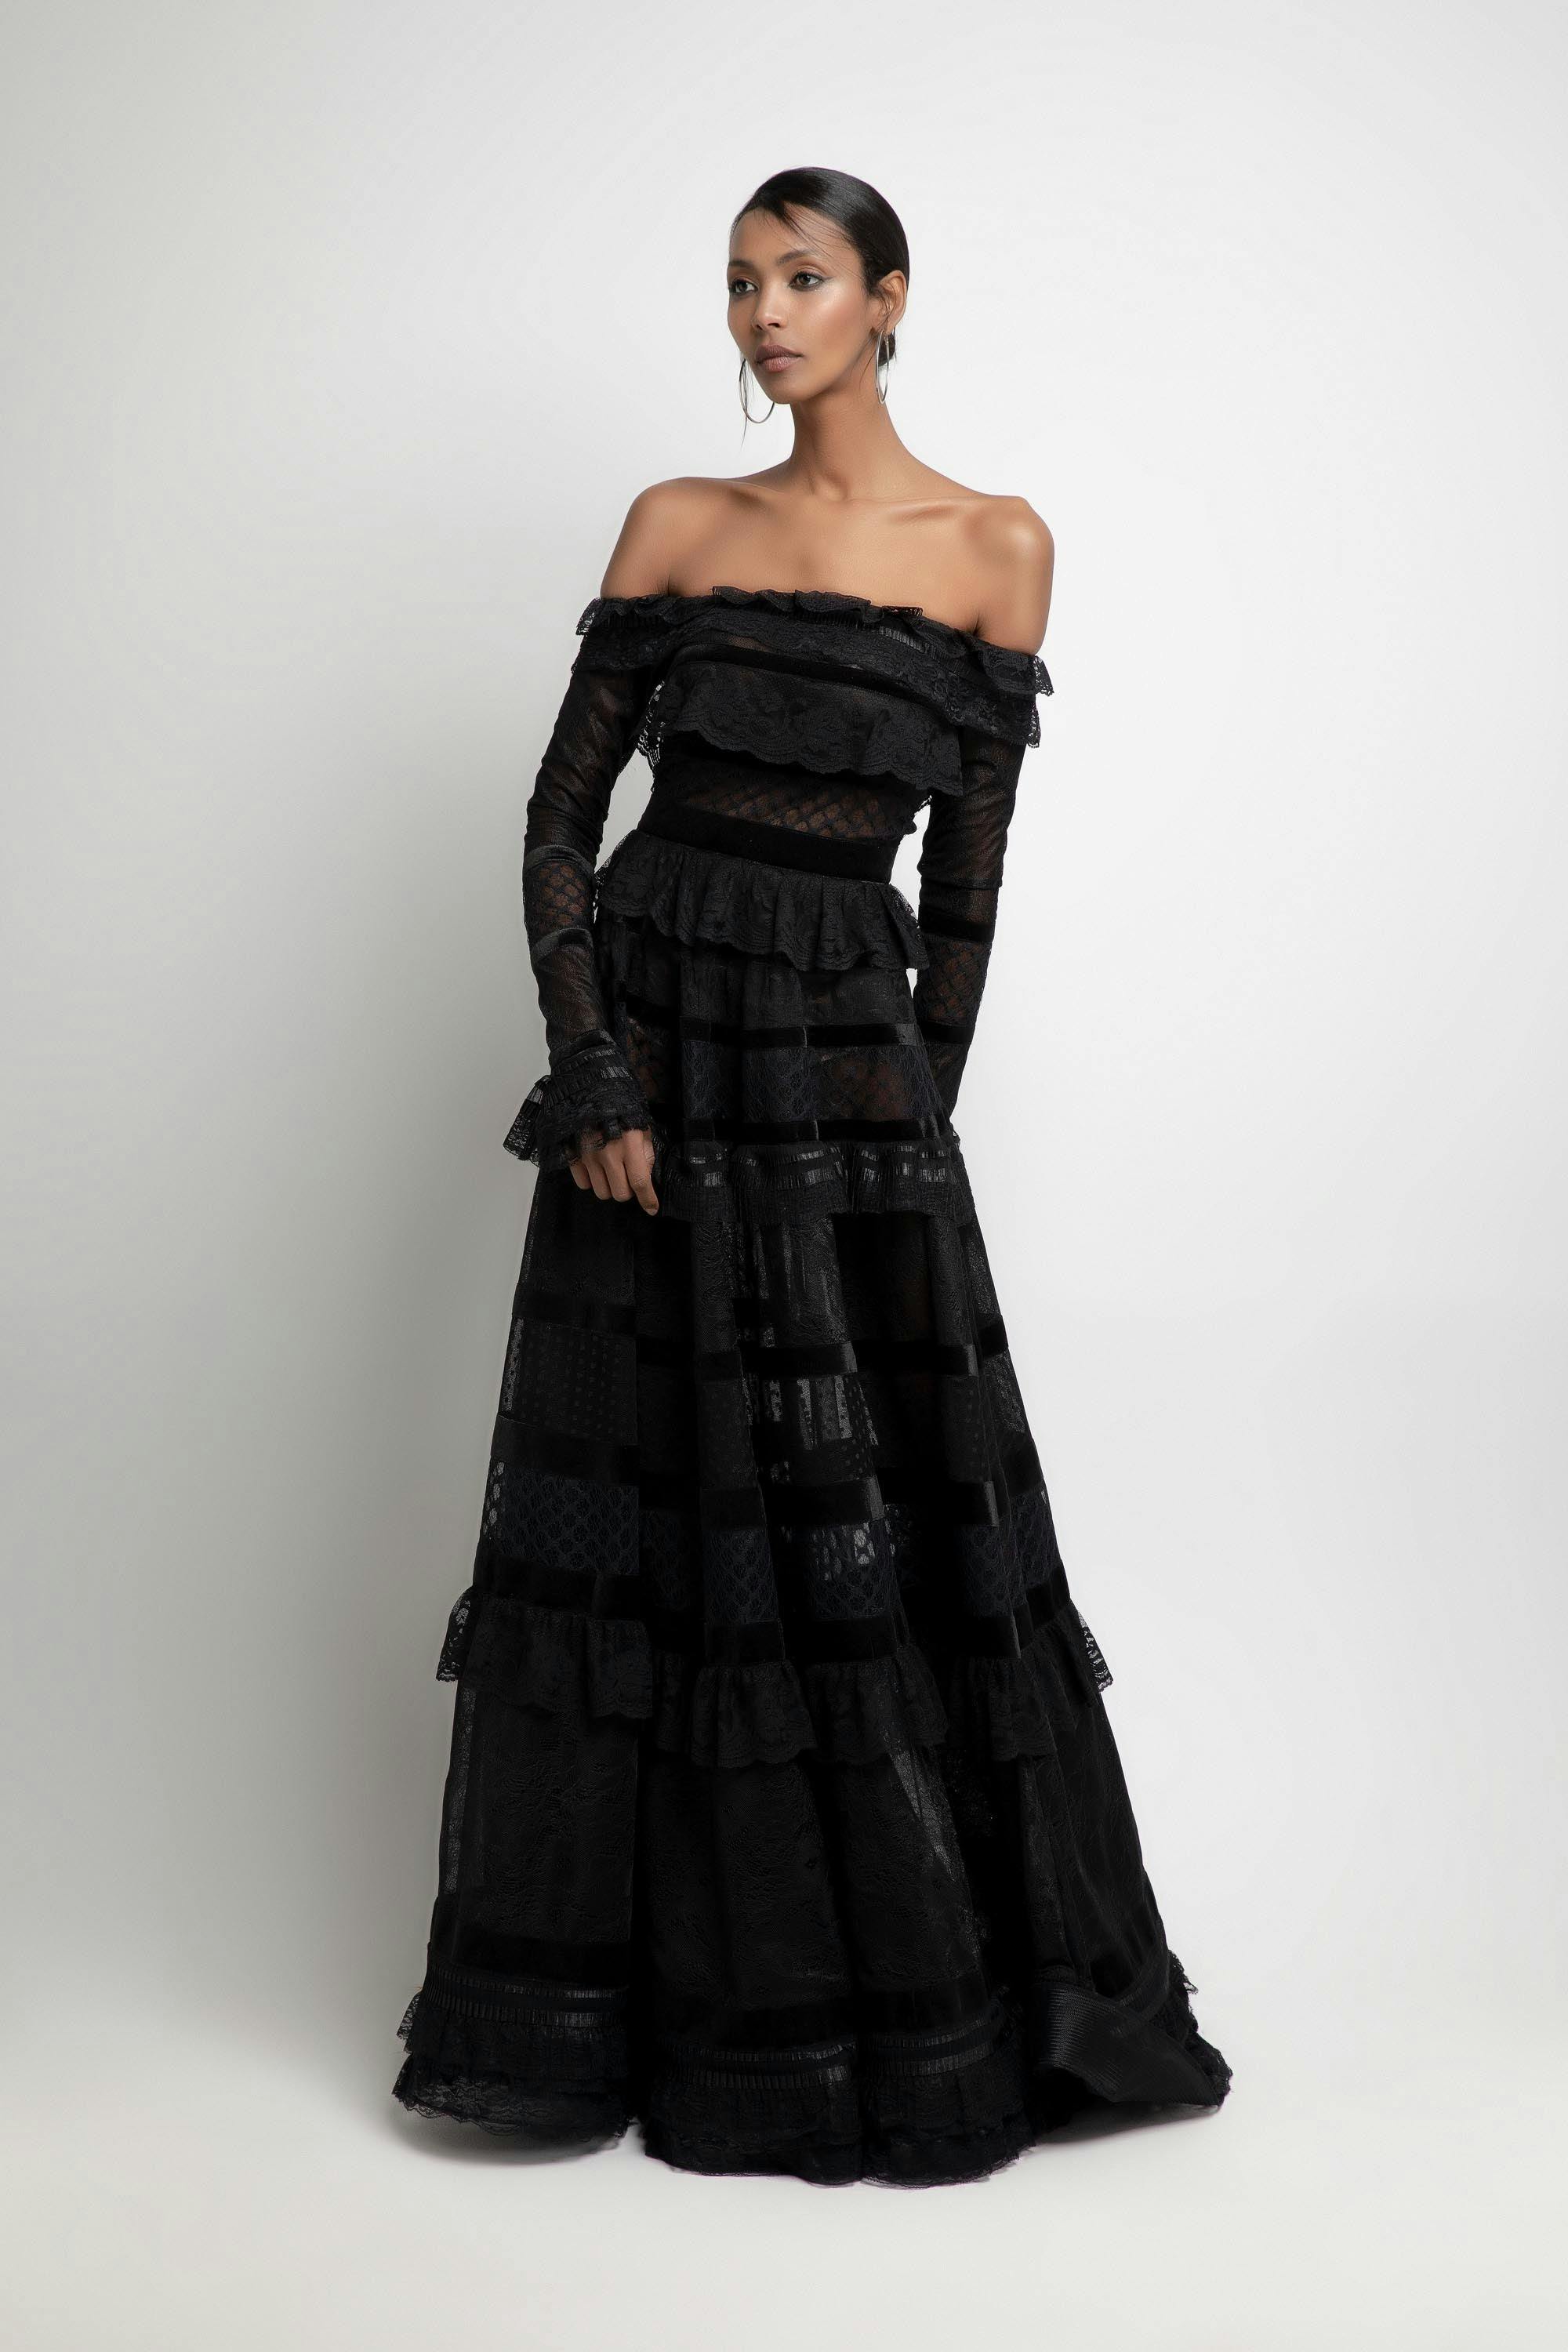 Look 19 - Jean fares couture - JFC-black lace boat neck,long sleev dress